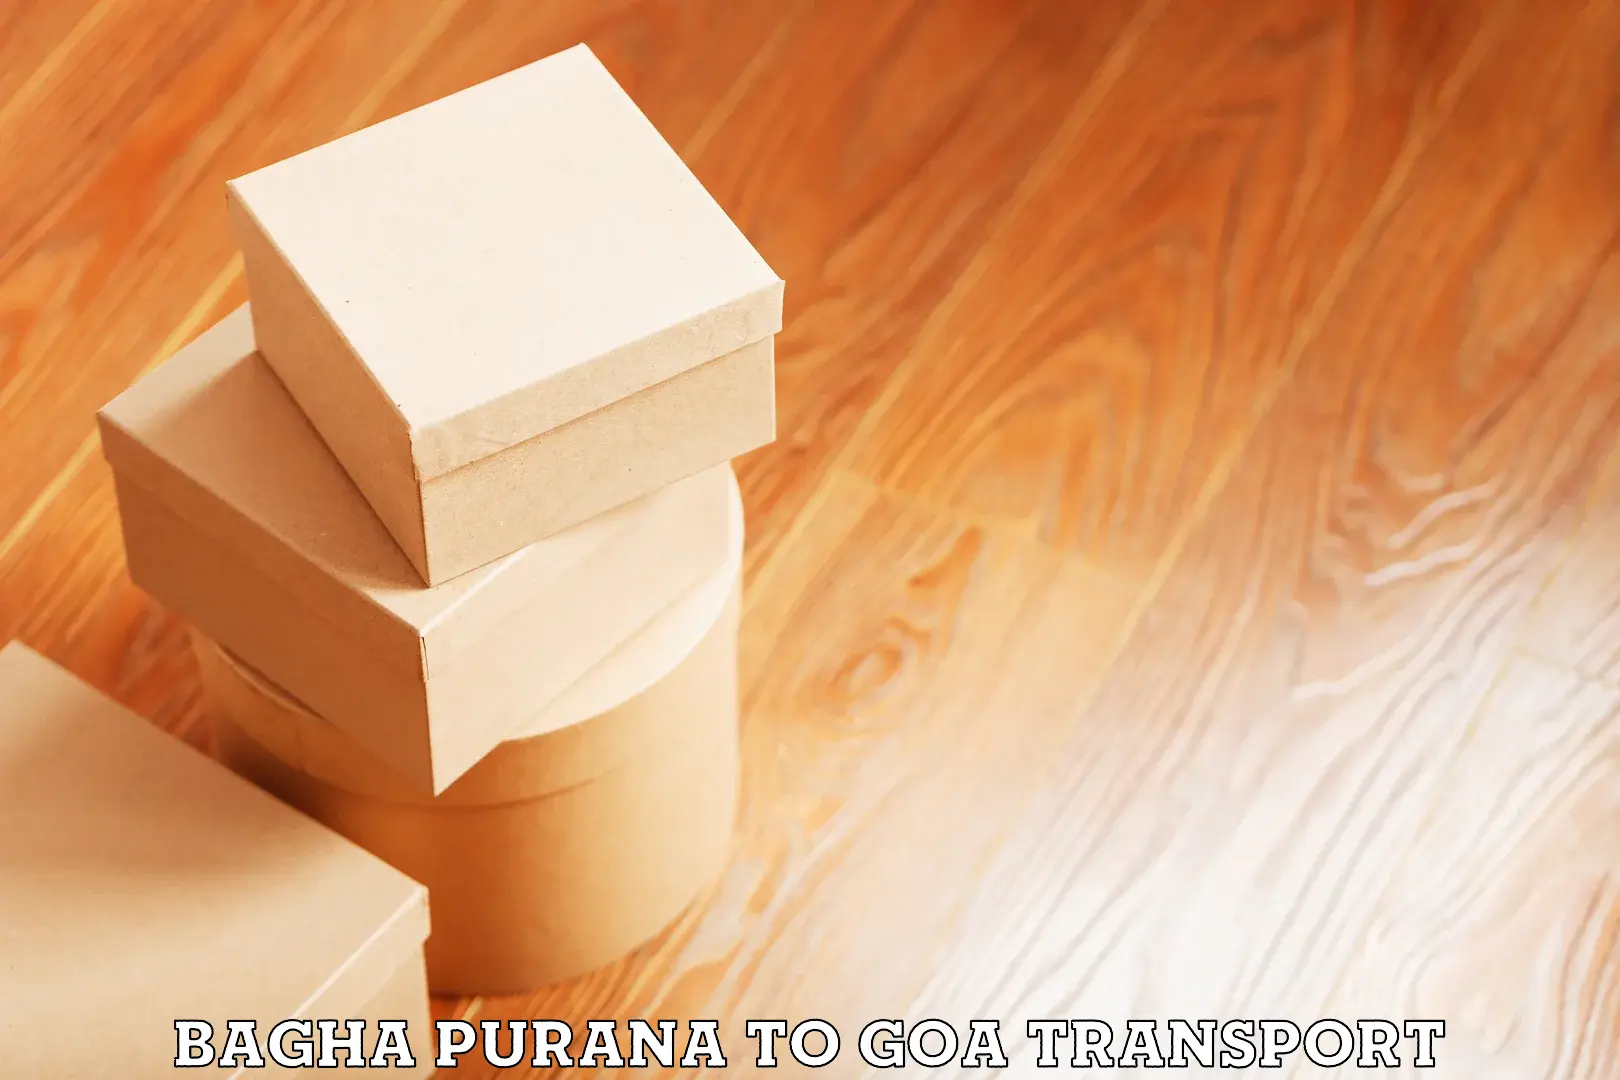 Air freight transport services in Bagha Purana to South Goa